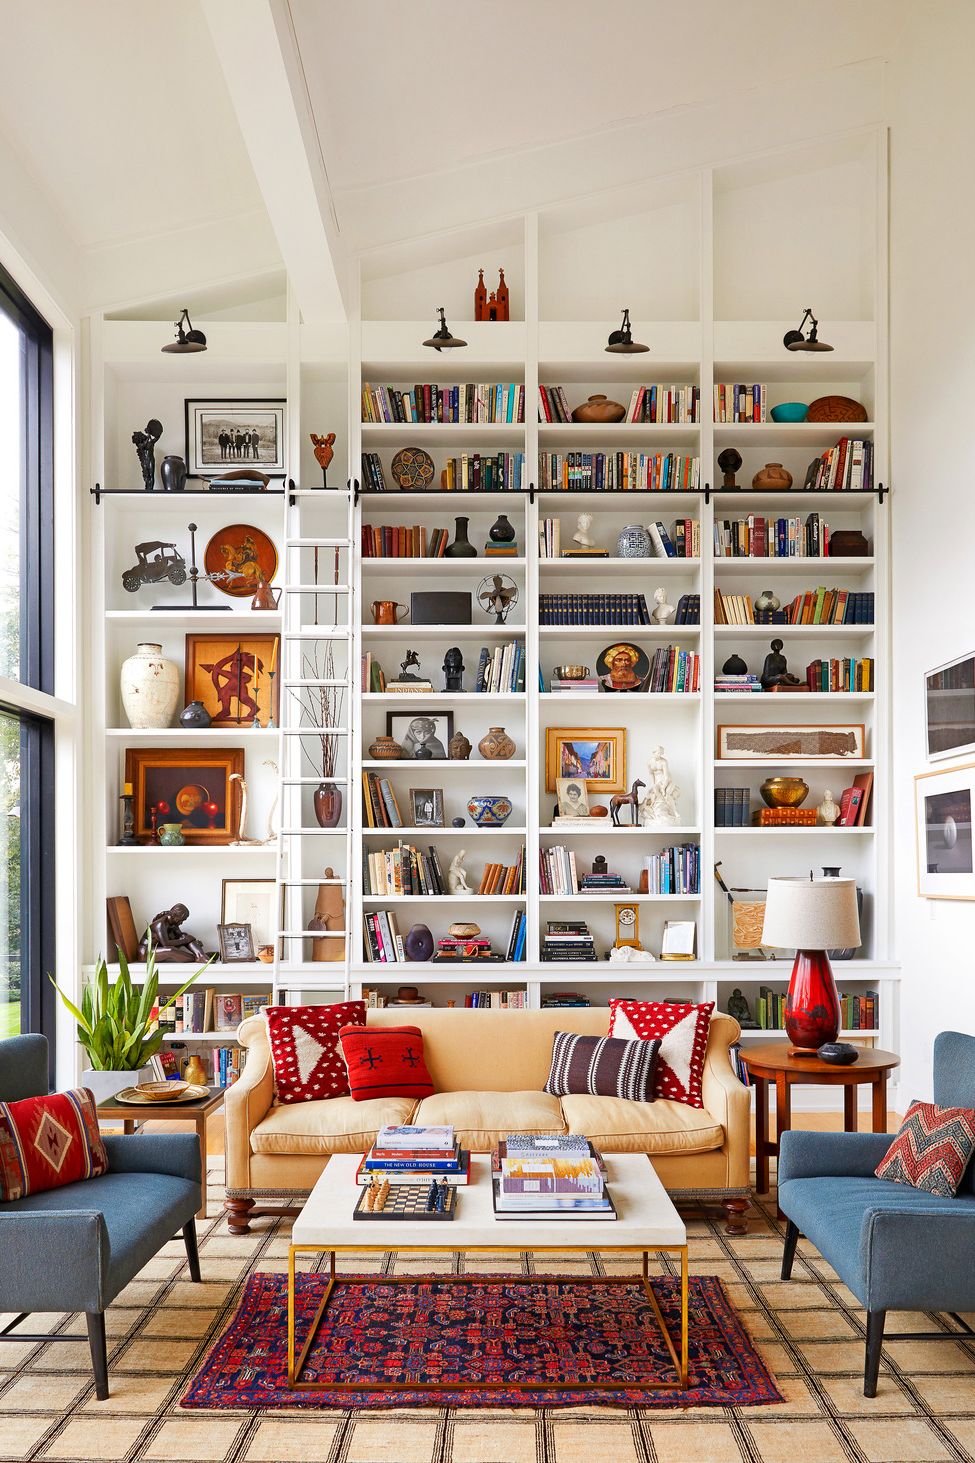 living room with high built in shelves, built ins, bookcase, white walls, ladder, storage, library